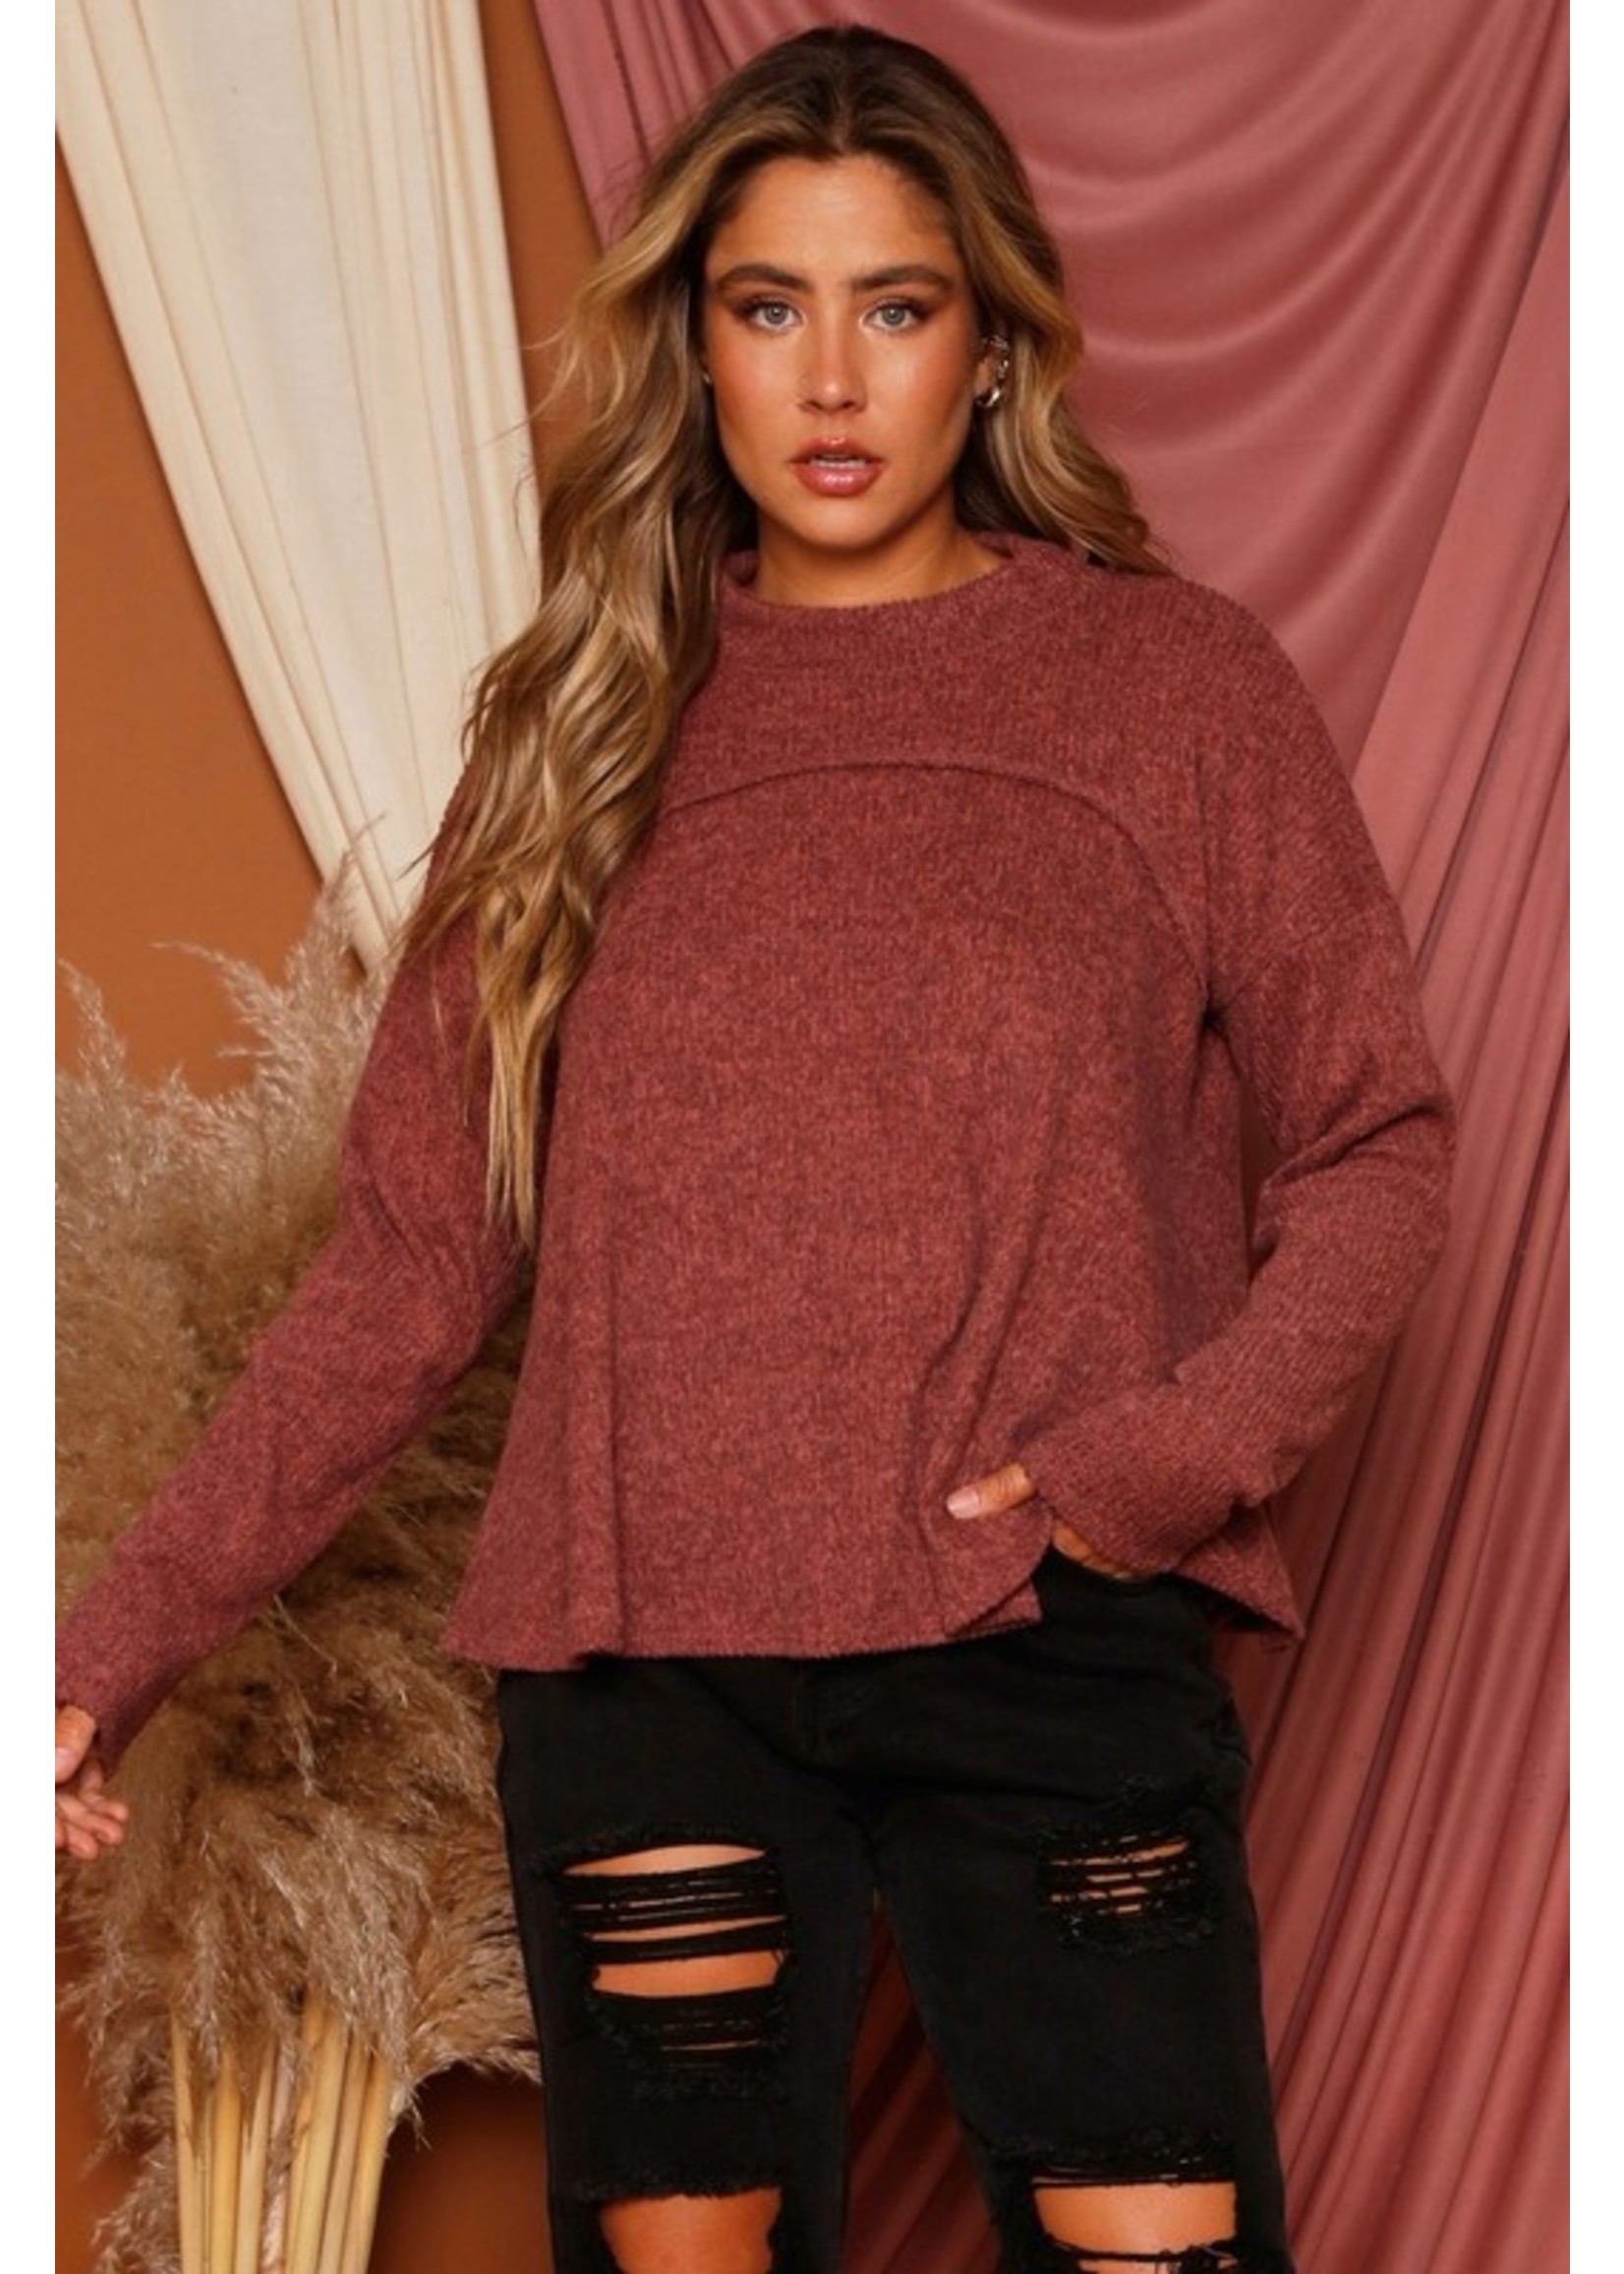 The Lavern Brushed Rib Knit Top